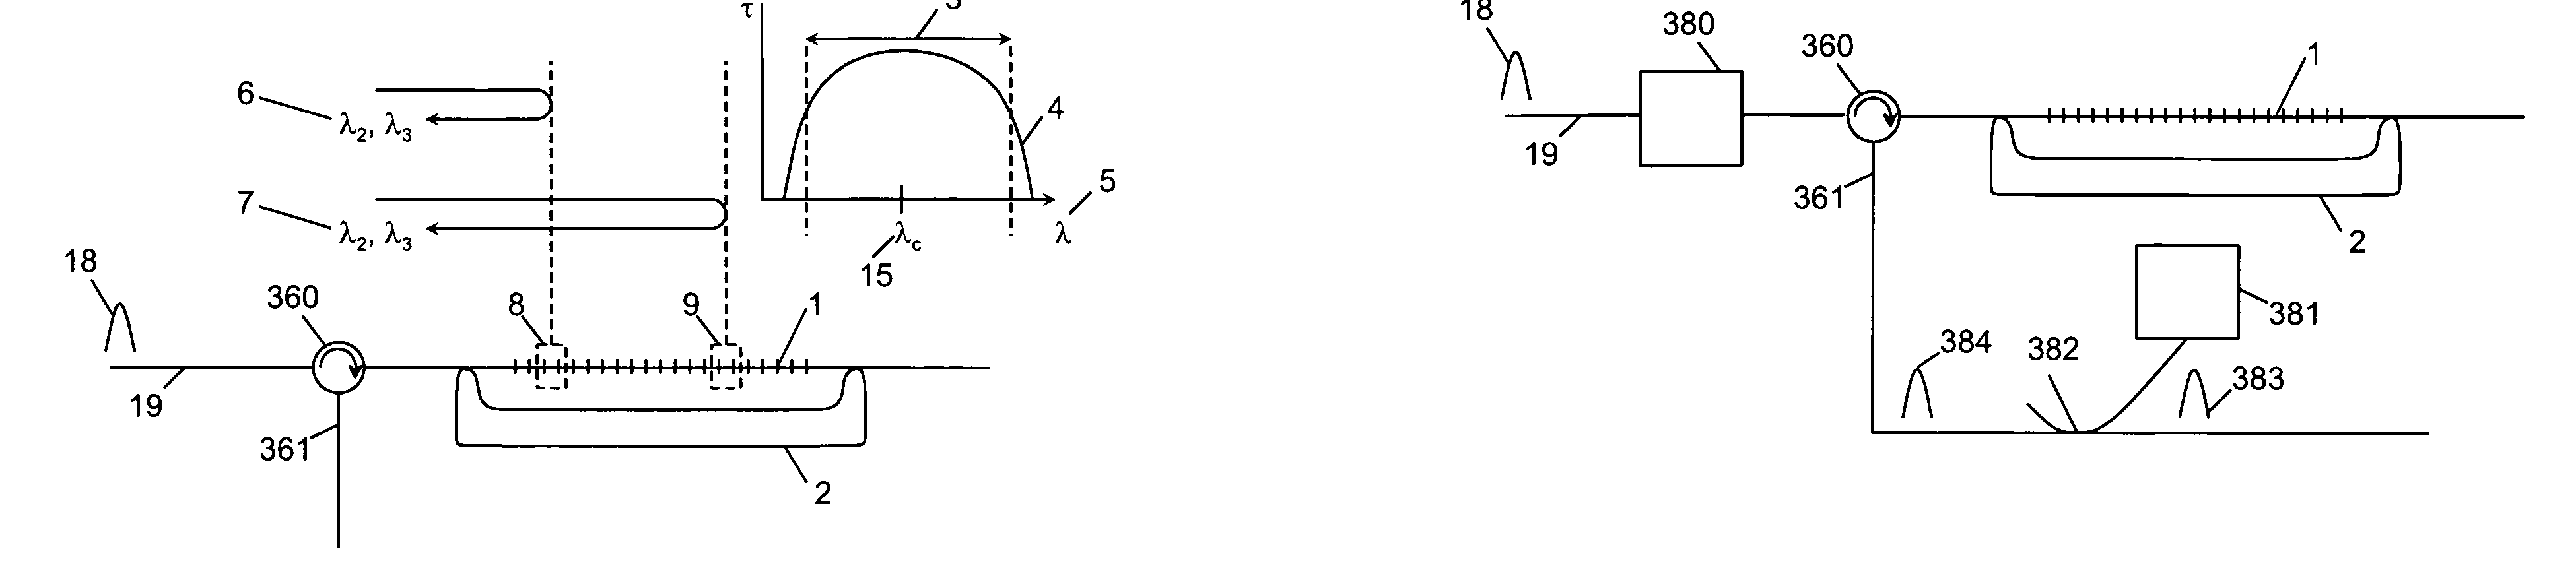 Apparatus for dispersion compensating a signal that propagates along a signal path